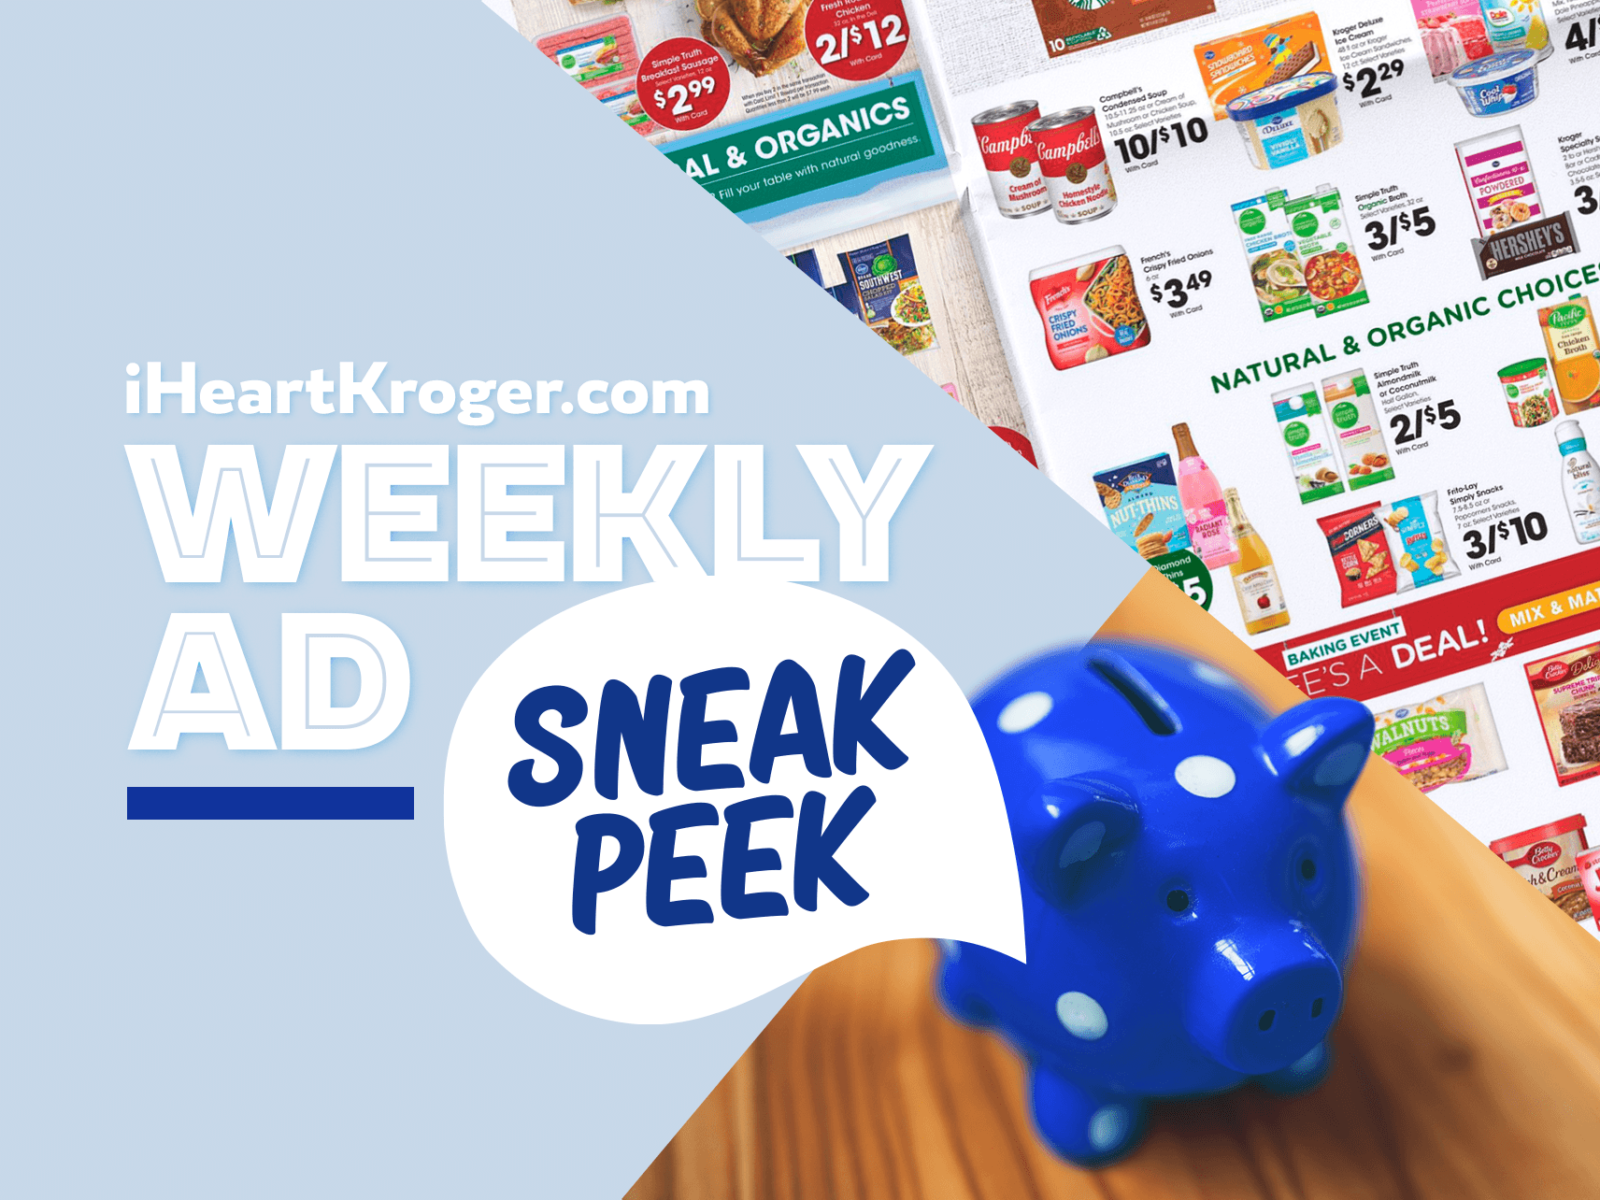 Kroger Ad & Coupons Week Of 10/26 to 11/1 – Mega Sale Continues